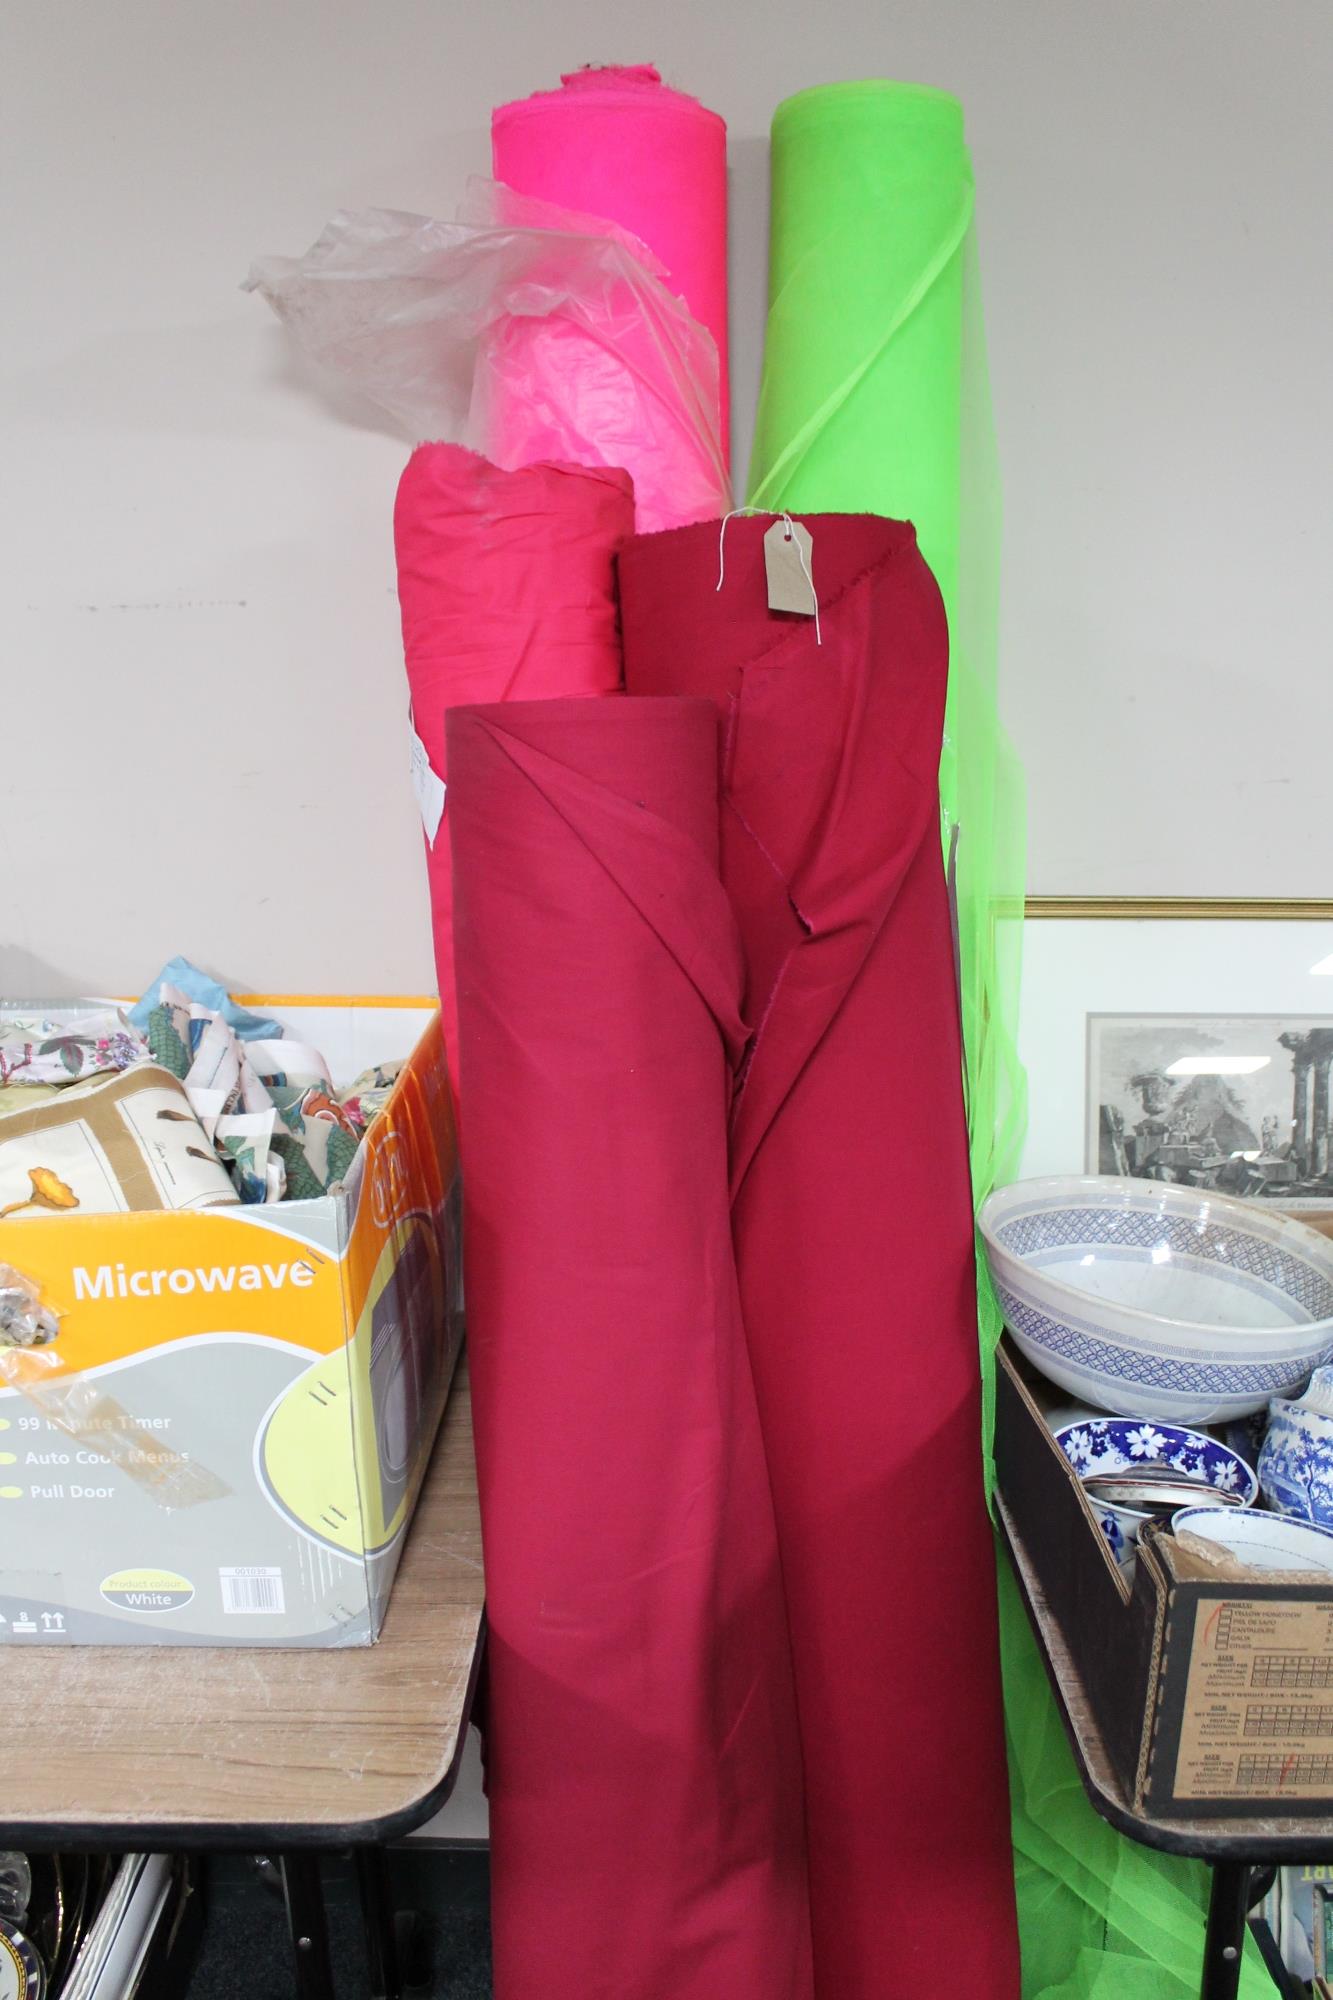 Three rolls of material (pink) together with two further rolls of netted fabric